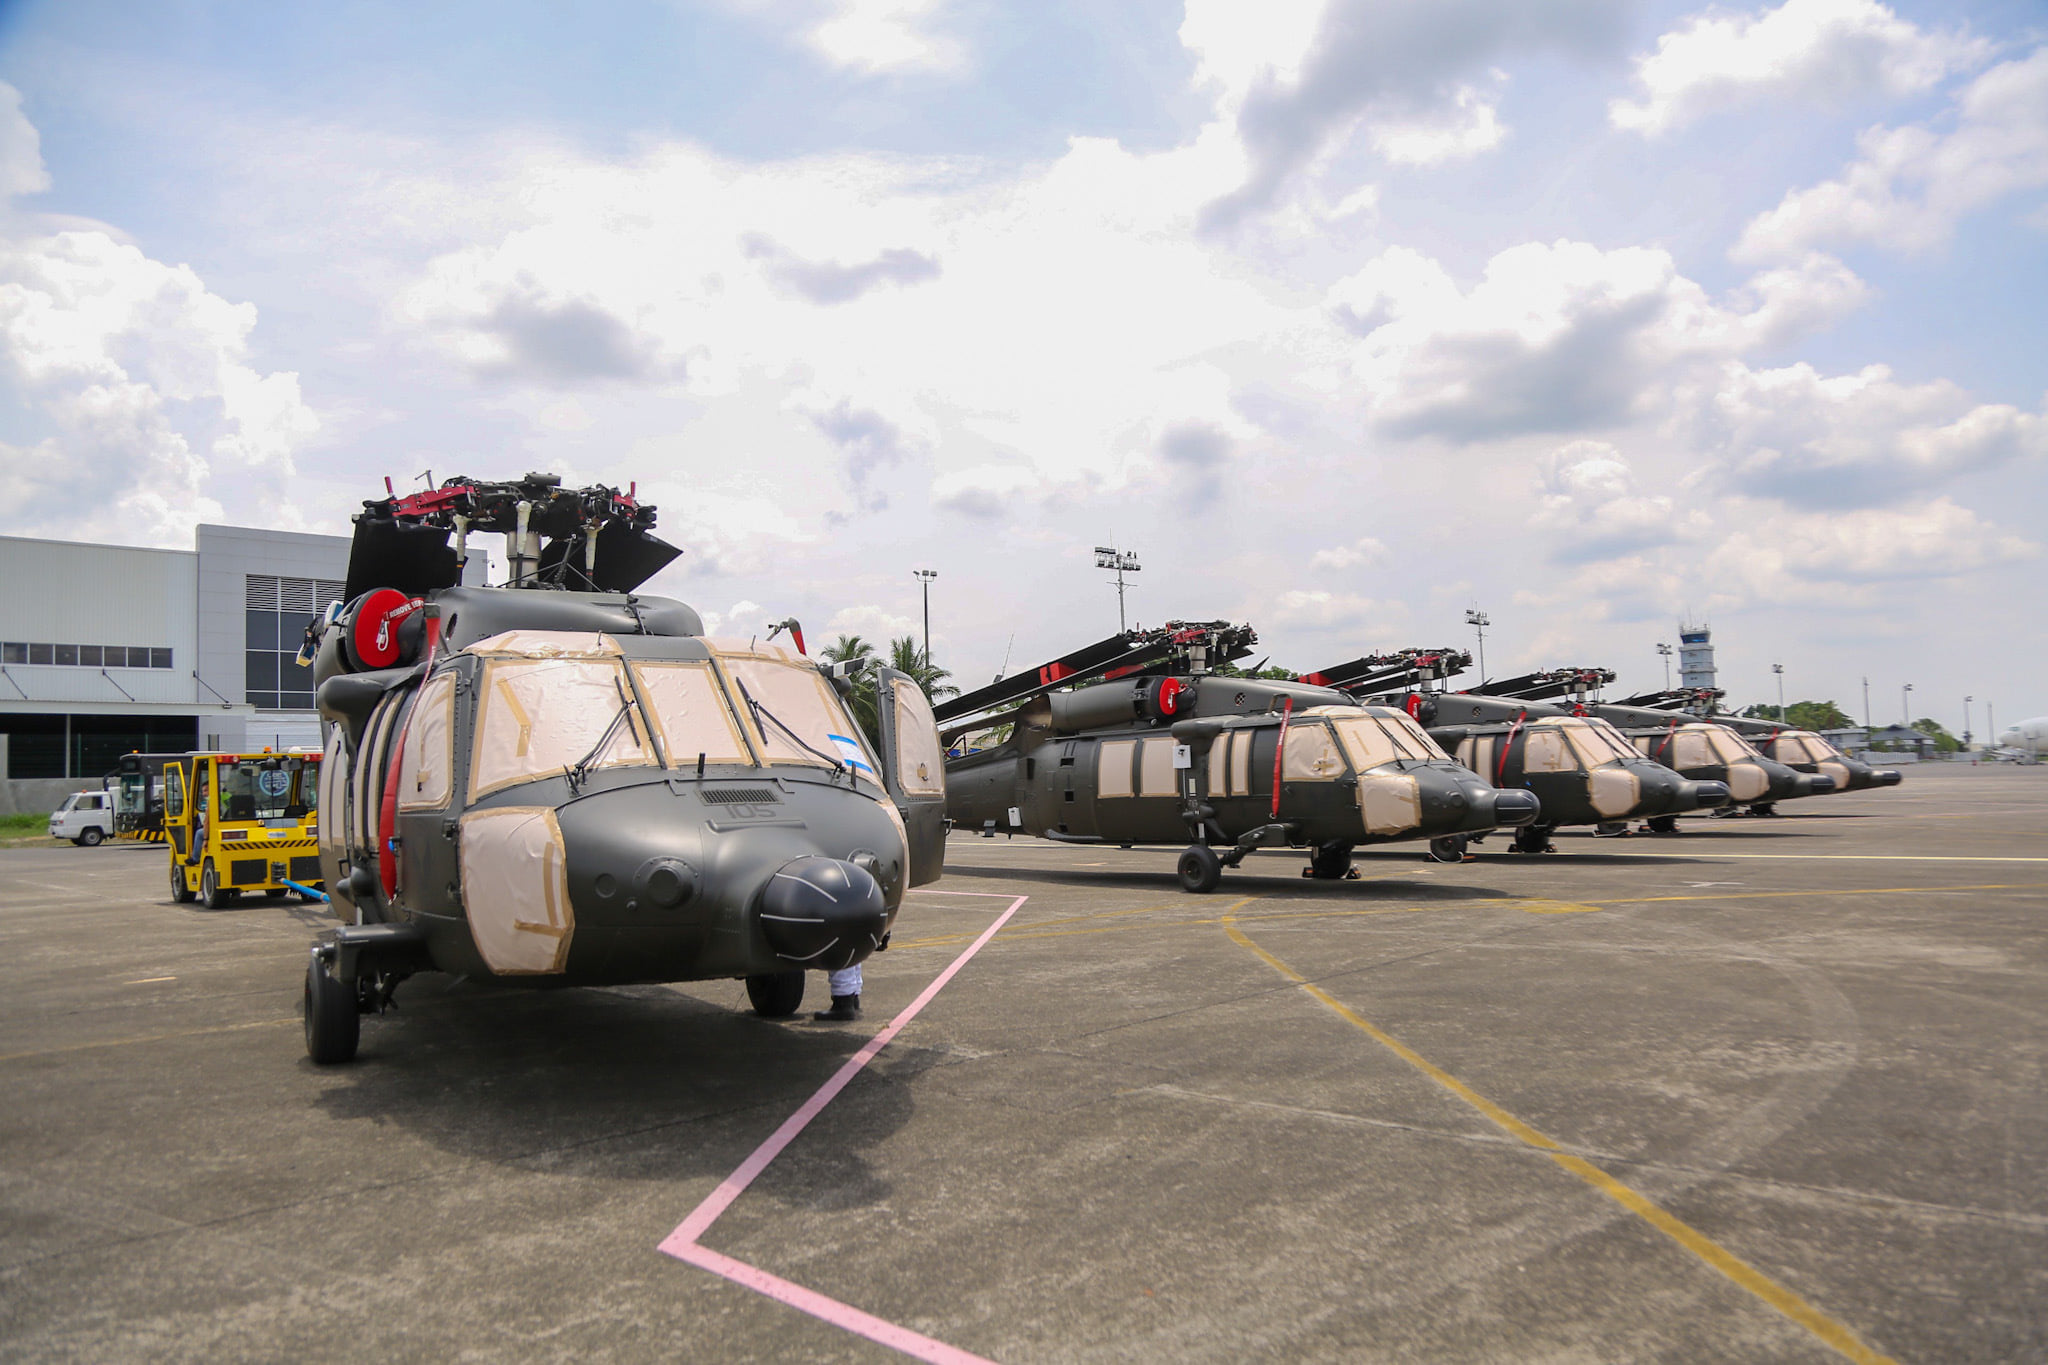 Philippine Air Force Receives Five More S-70i Black Hawk Combat Utility Helicopters